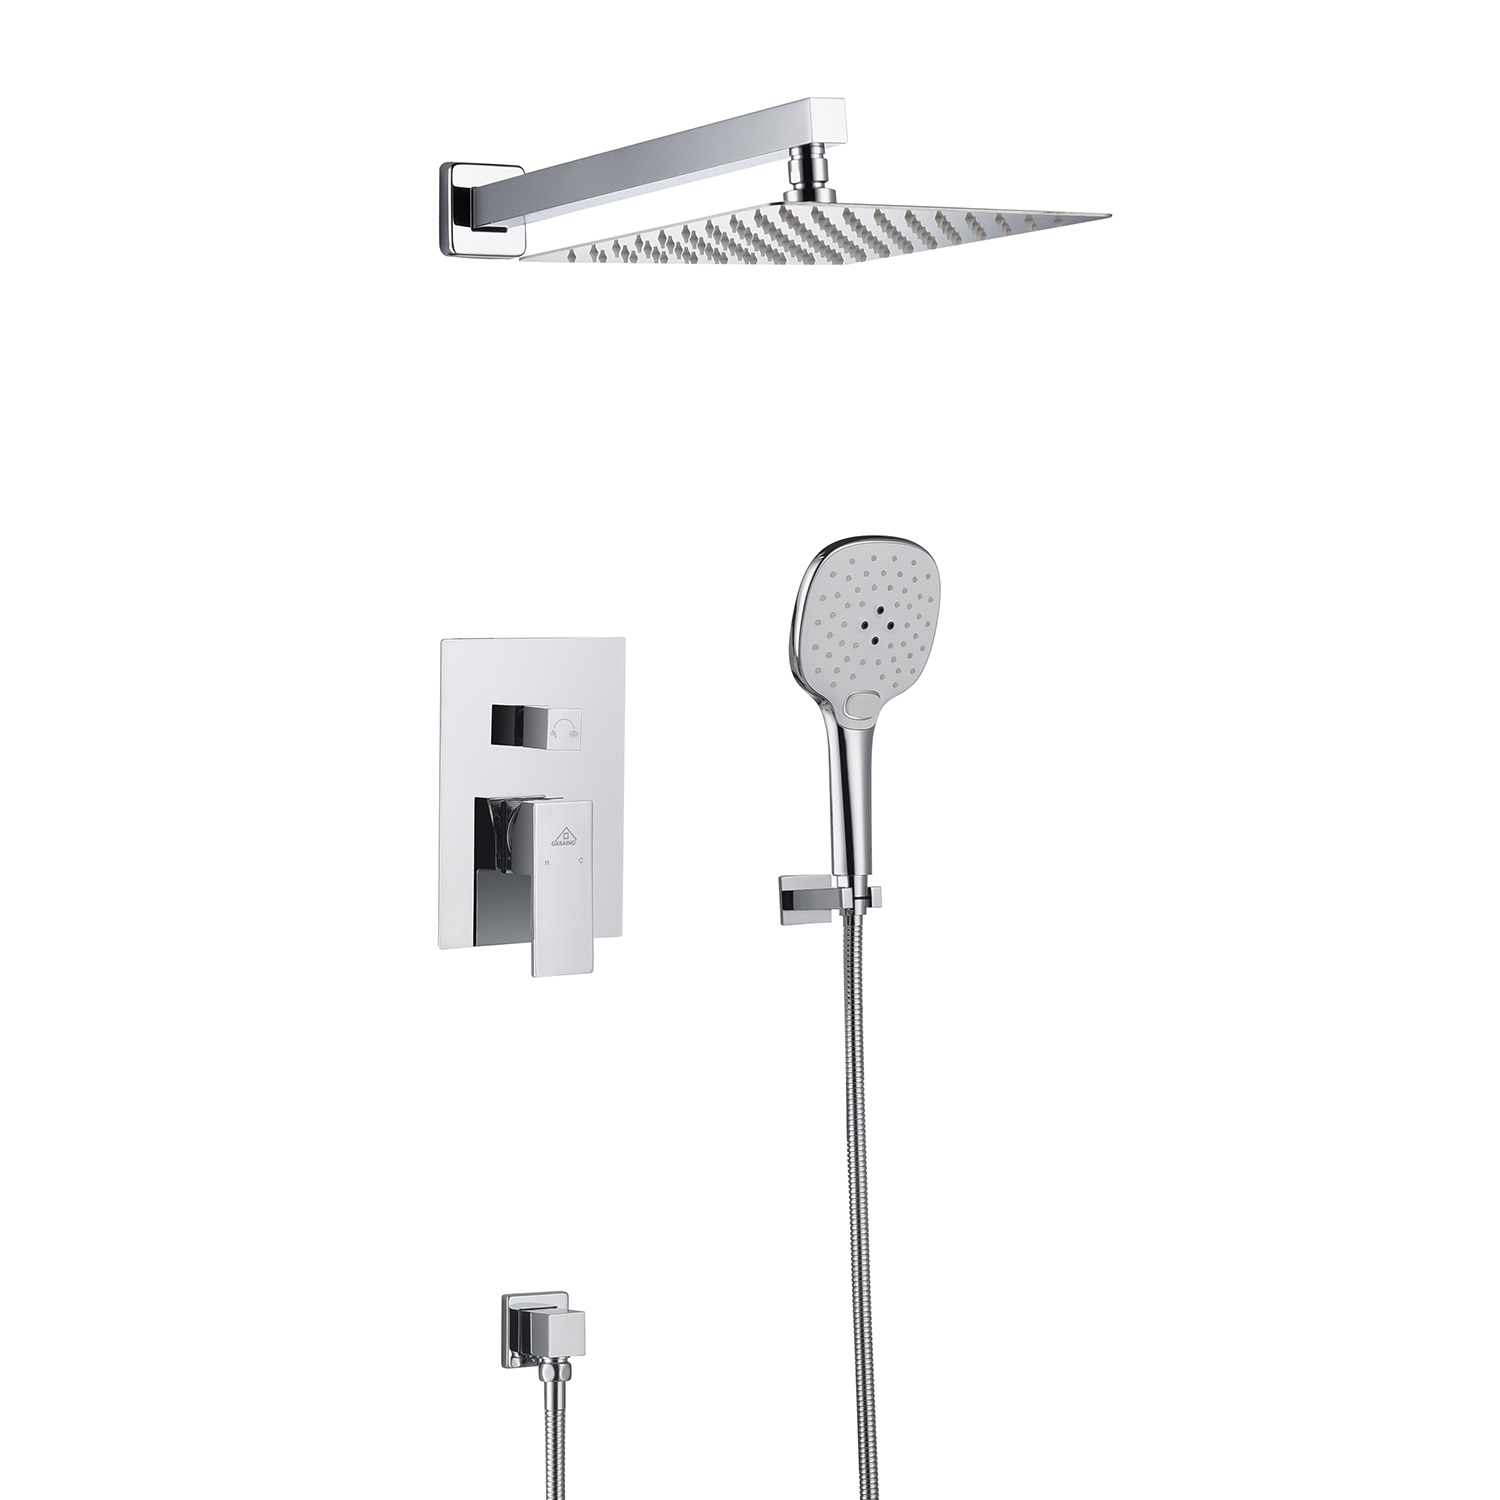 Casainc 2 Function 10" Wall Mounted Dual Shower Heads Shower System In Chrome-CASAINC